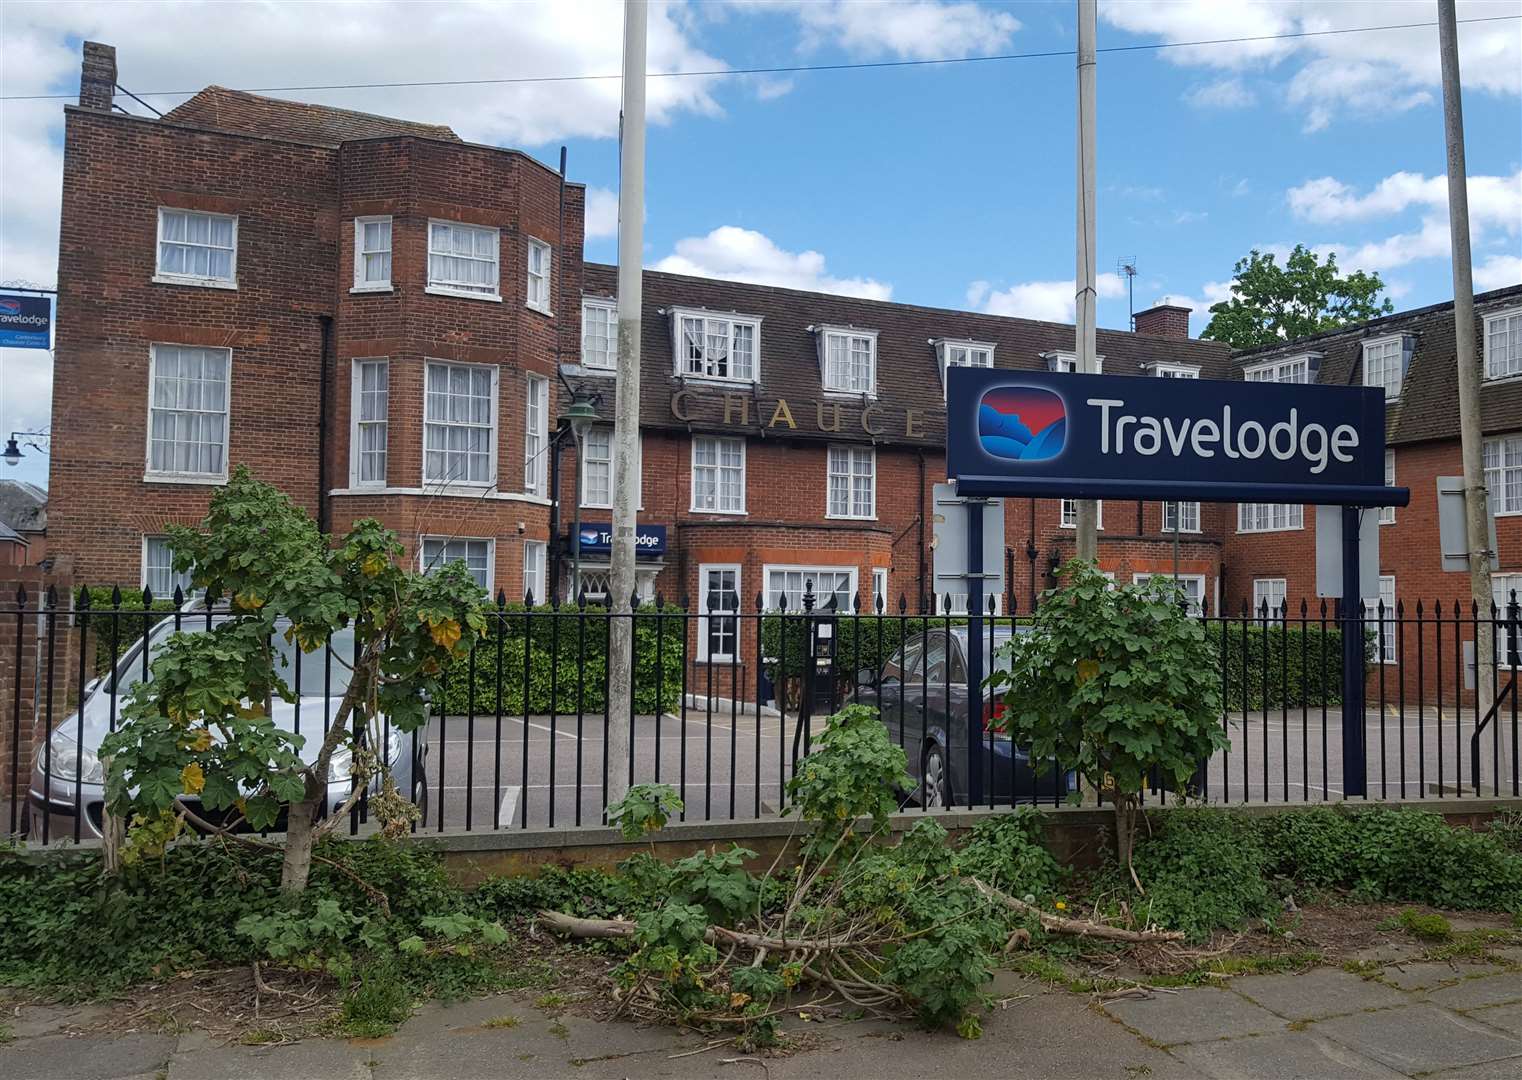 The city centre Travelodge in Ivy Lane, Canterbury